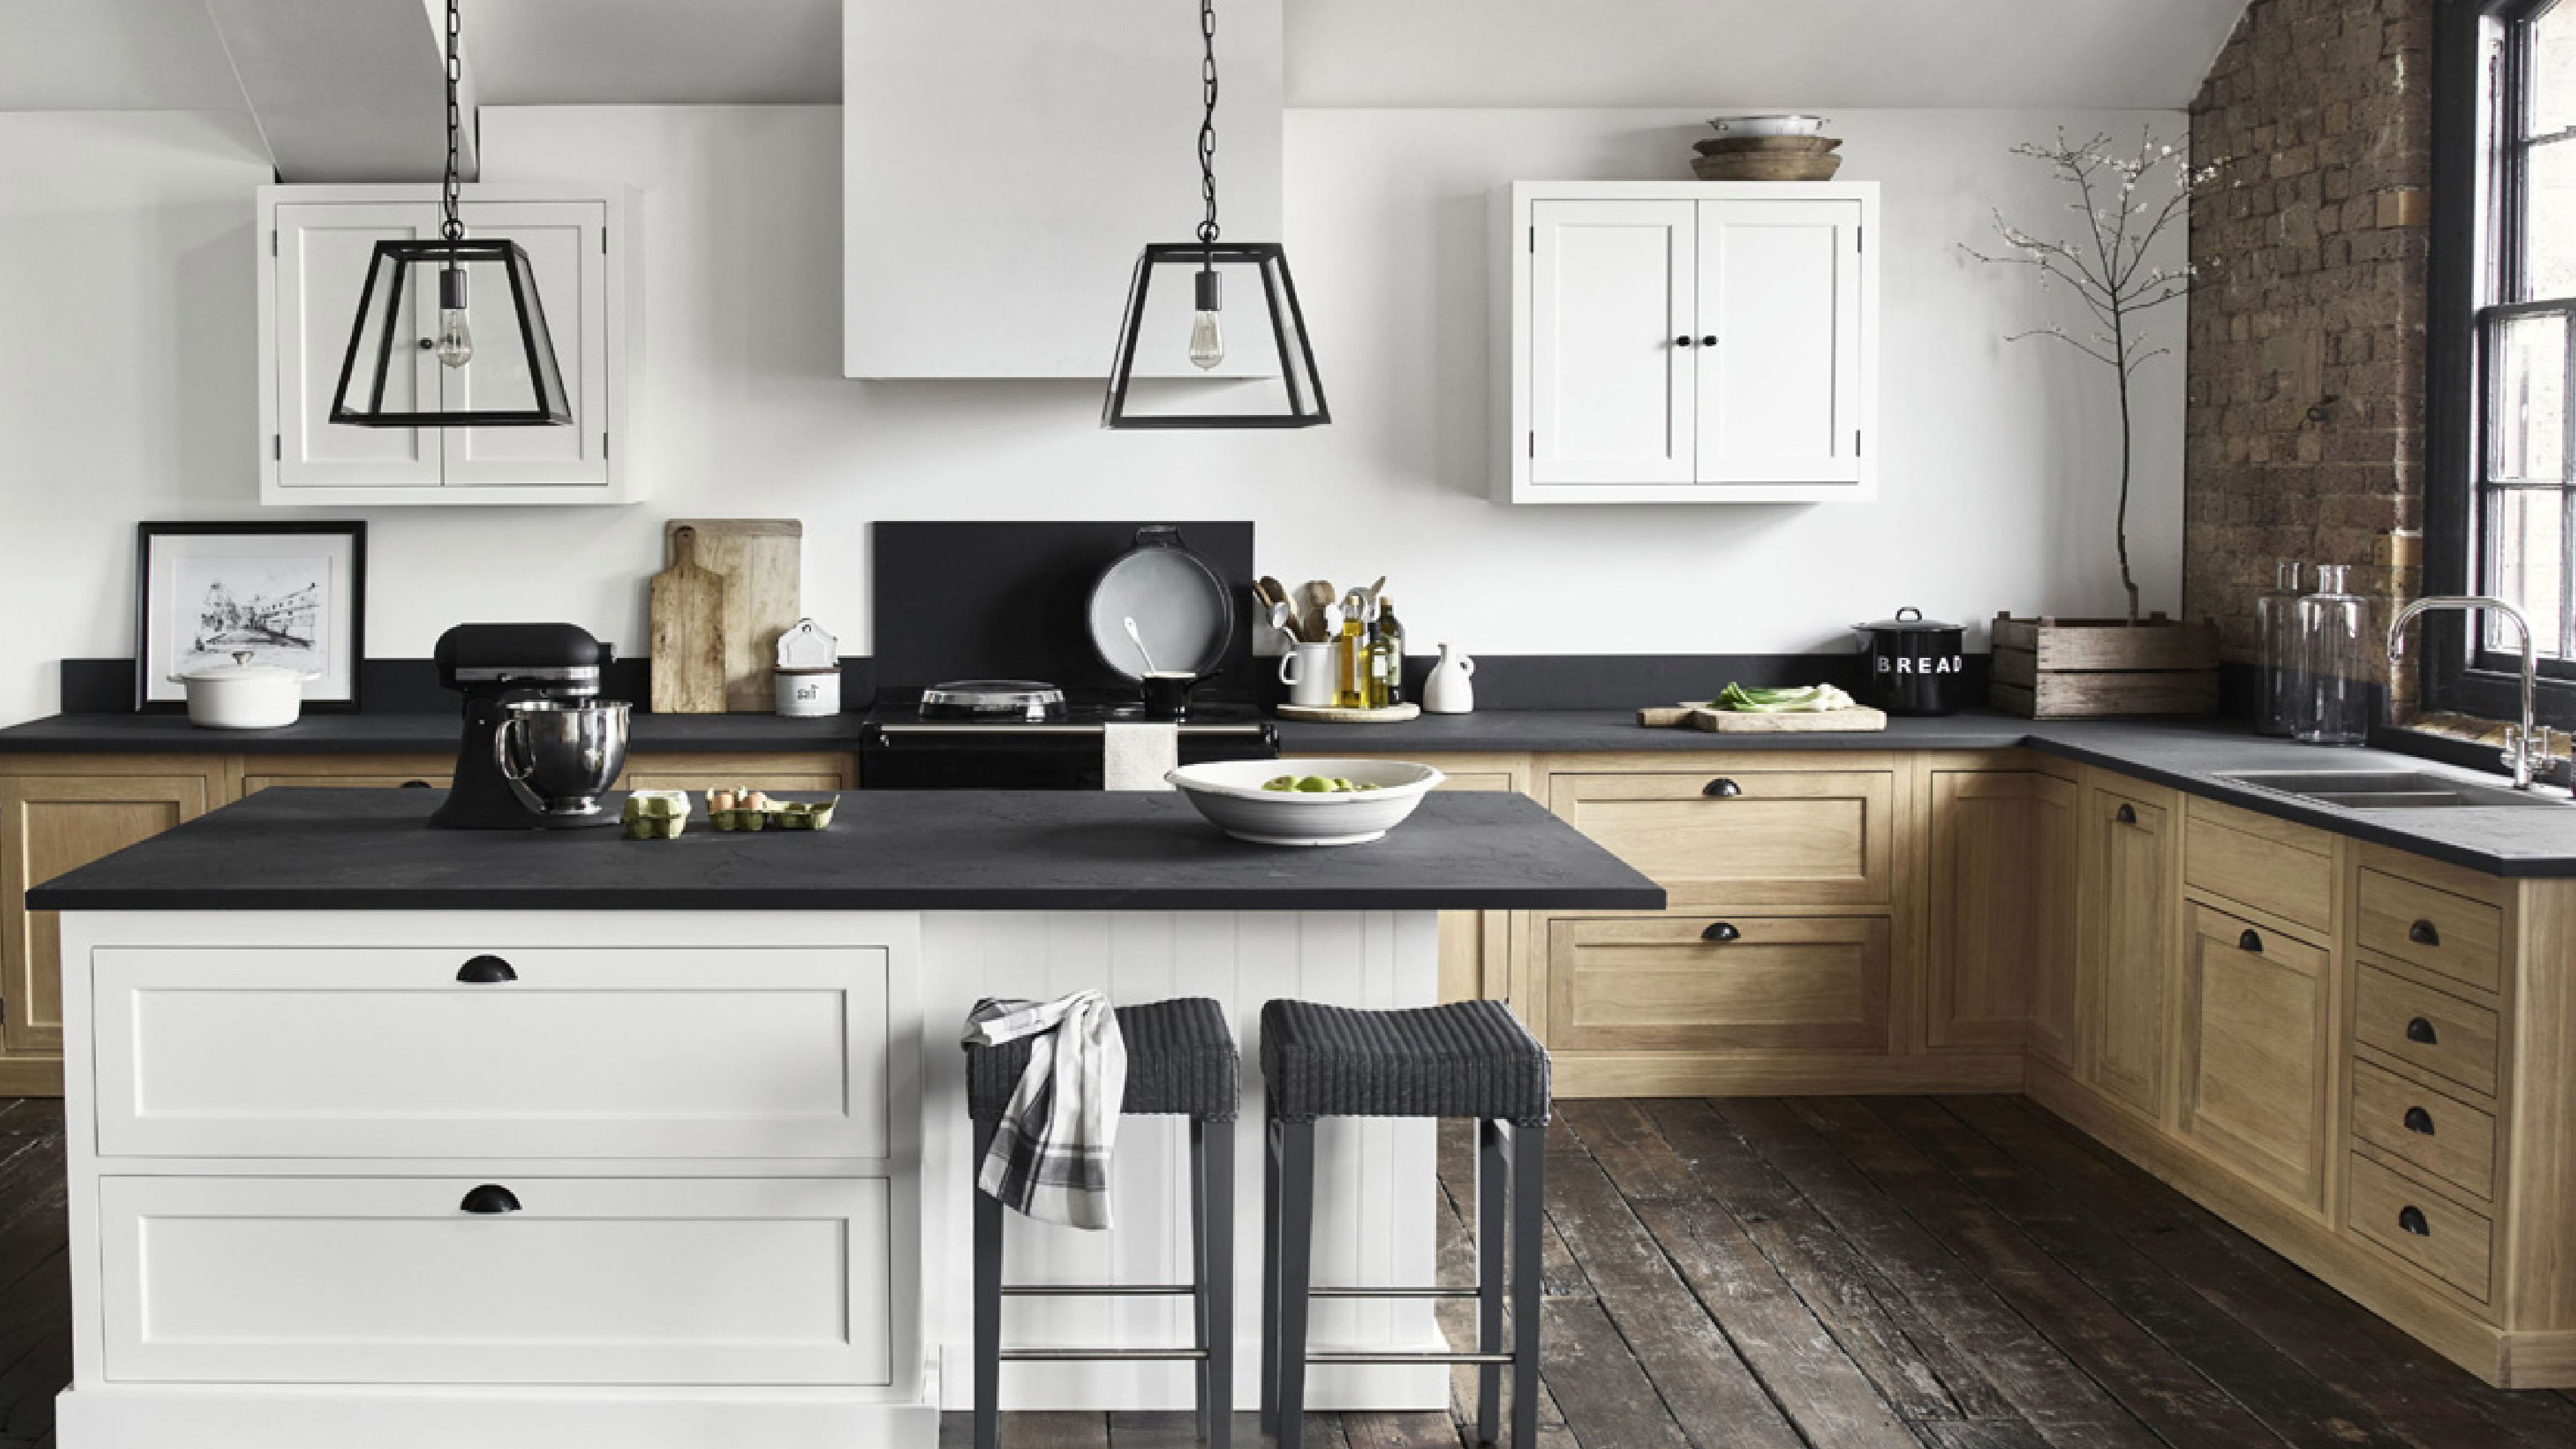 17 kitchen interior design tips from an expert – create your dream